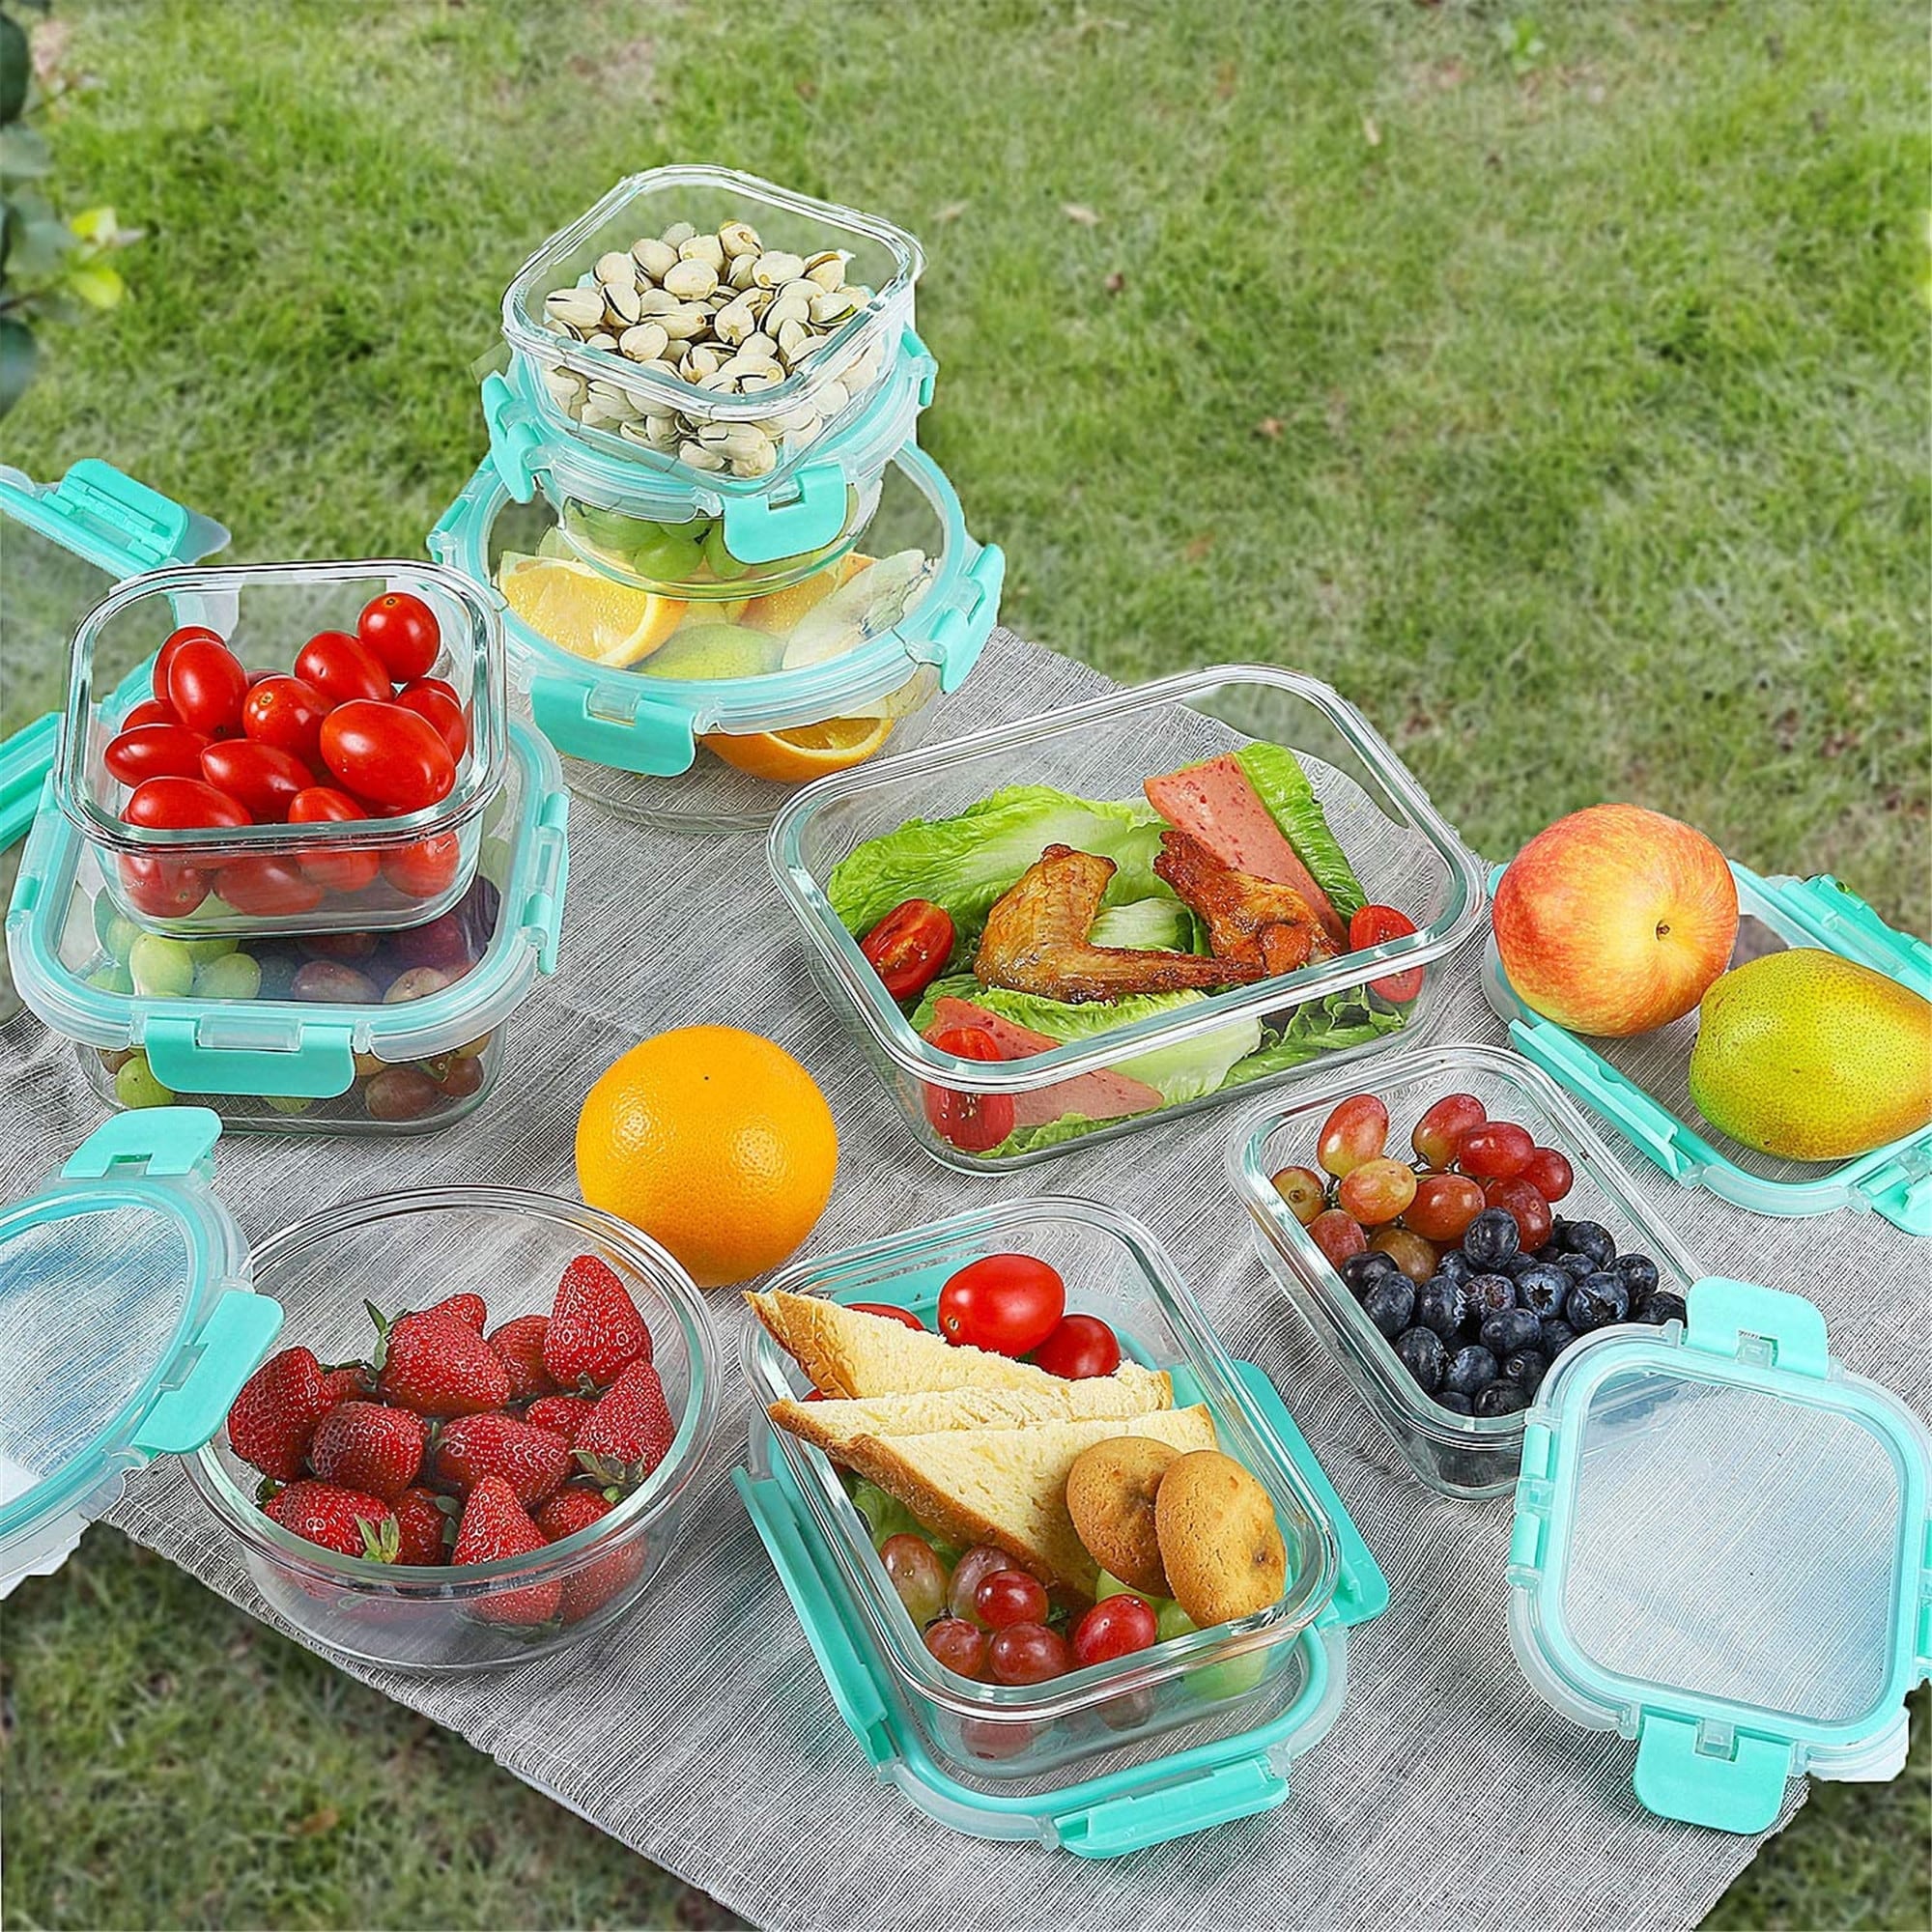 Bayco 10 Pack Glass Meal Prep Containers 2 Compartment, Glass Food Storage  Containers with Lids, Airtight Glass Lunch Bento